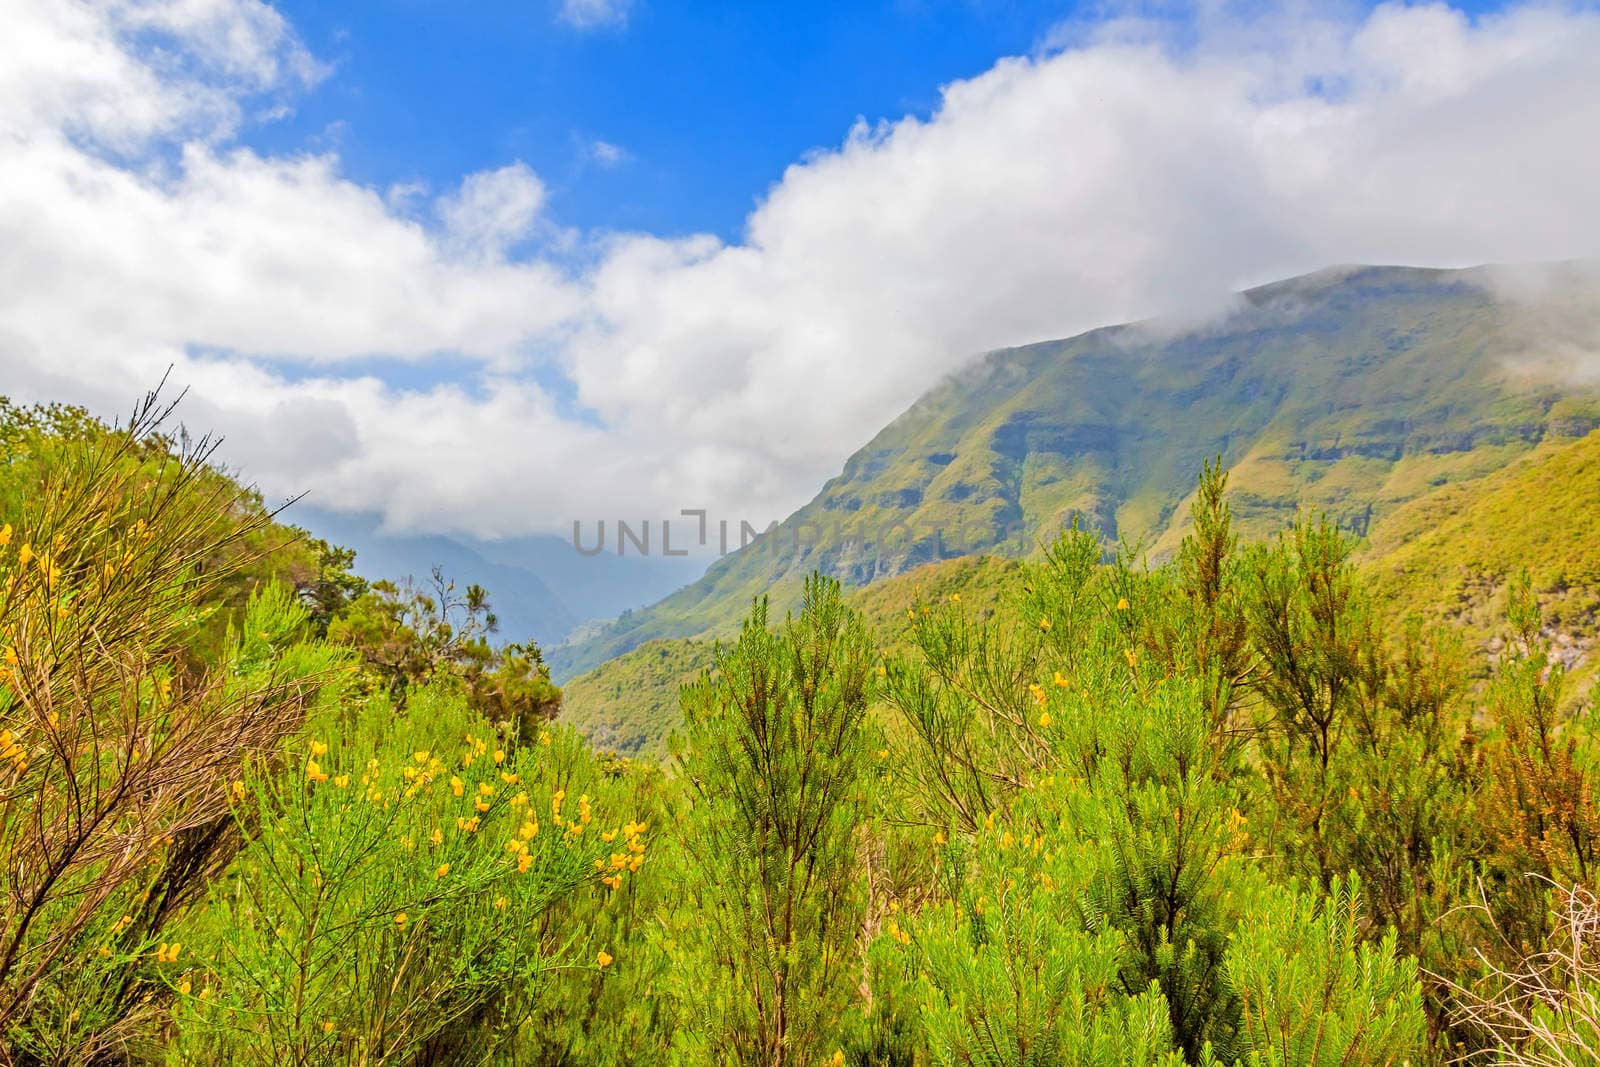 Island of Madeira - the magnificent natural landscape in the west, near the 25 Fontes falls